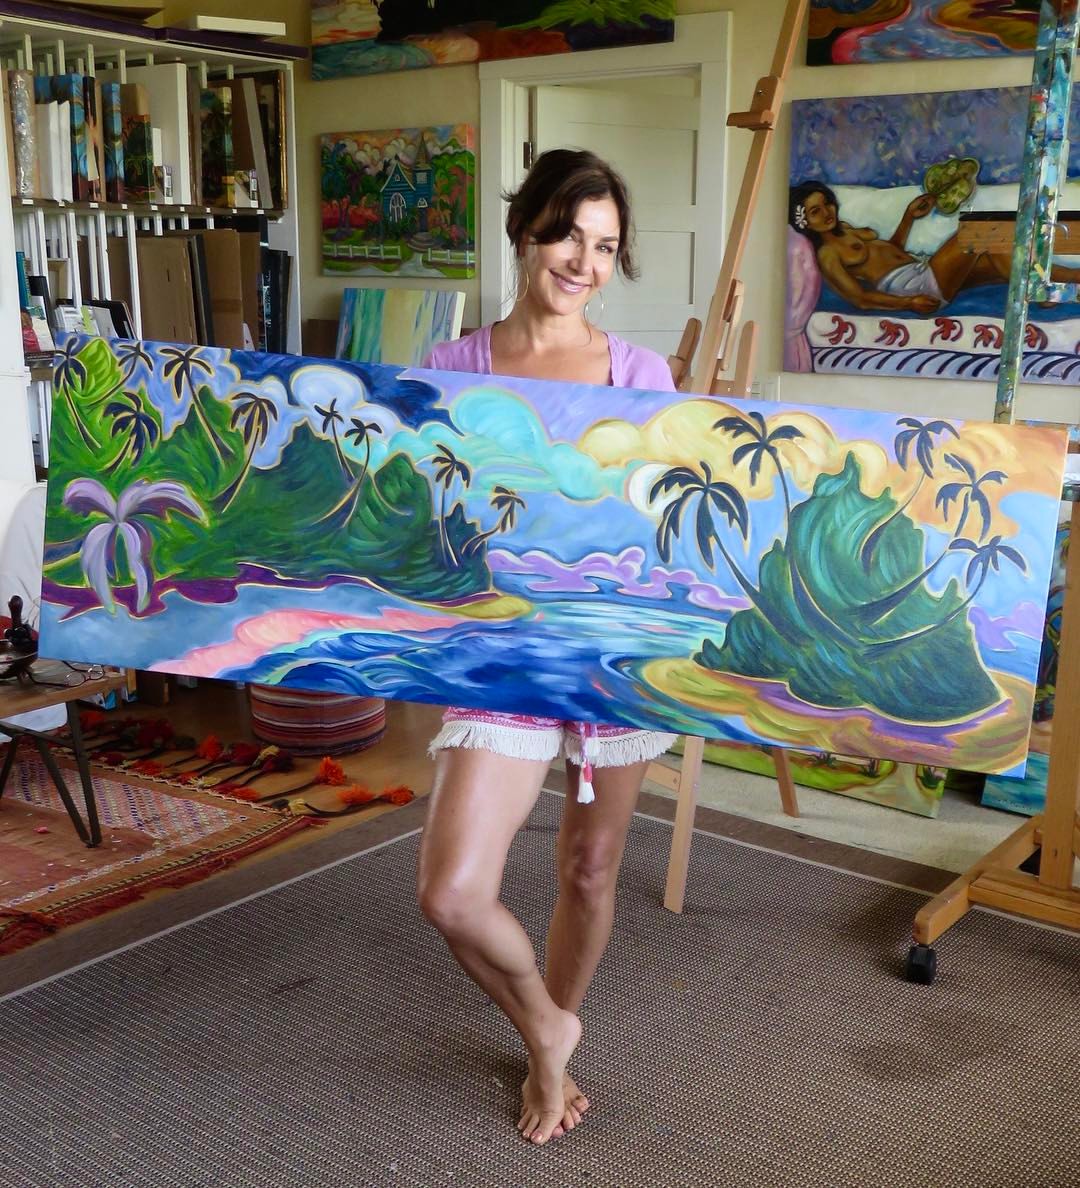 Kim McDonald posing with one of her wide art pieces